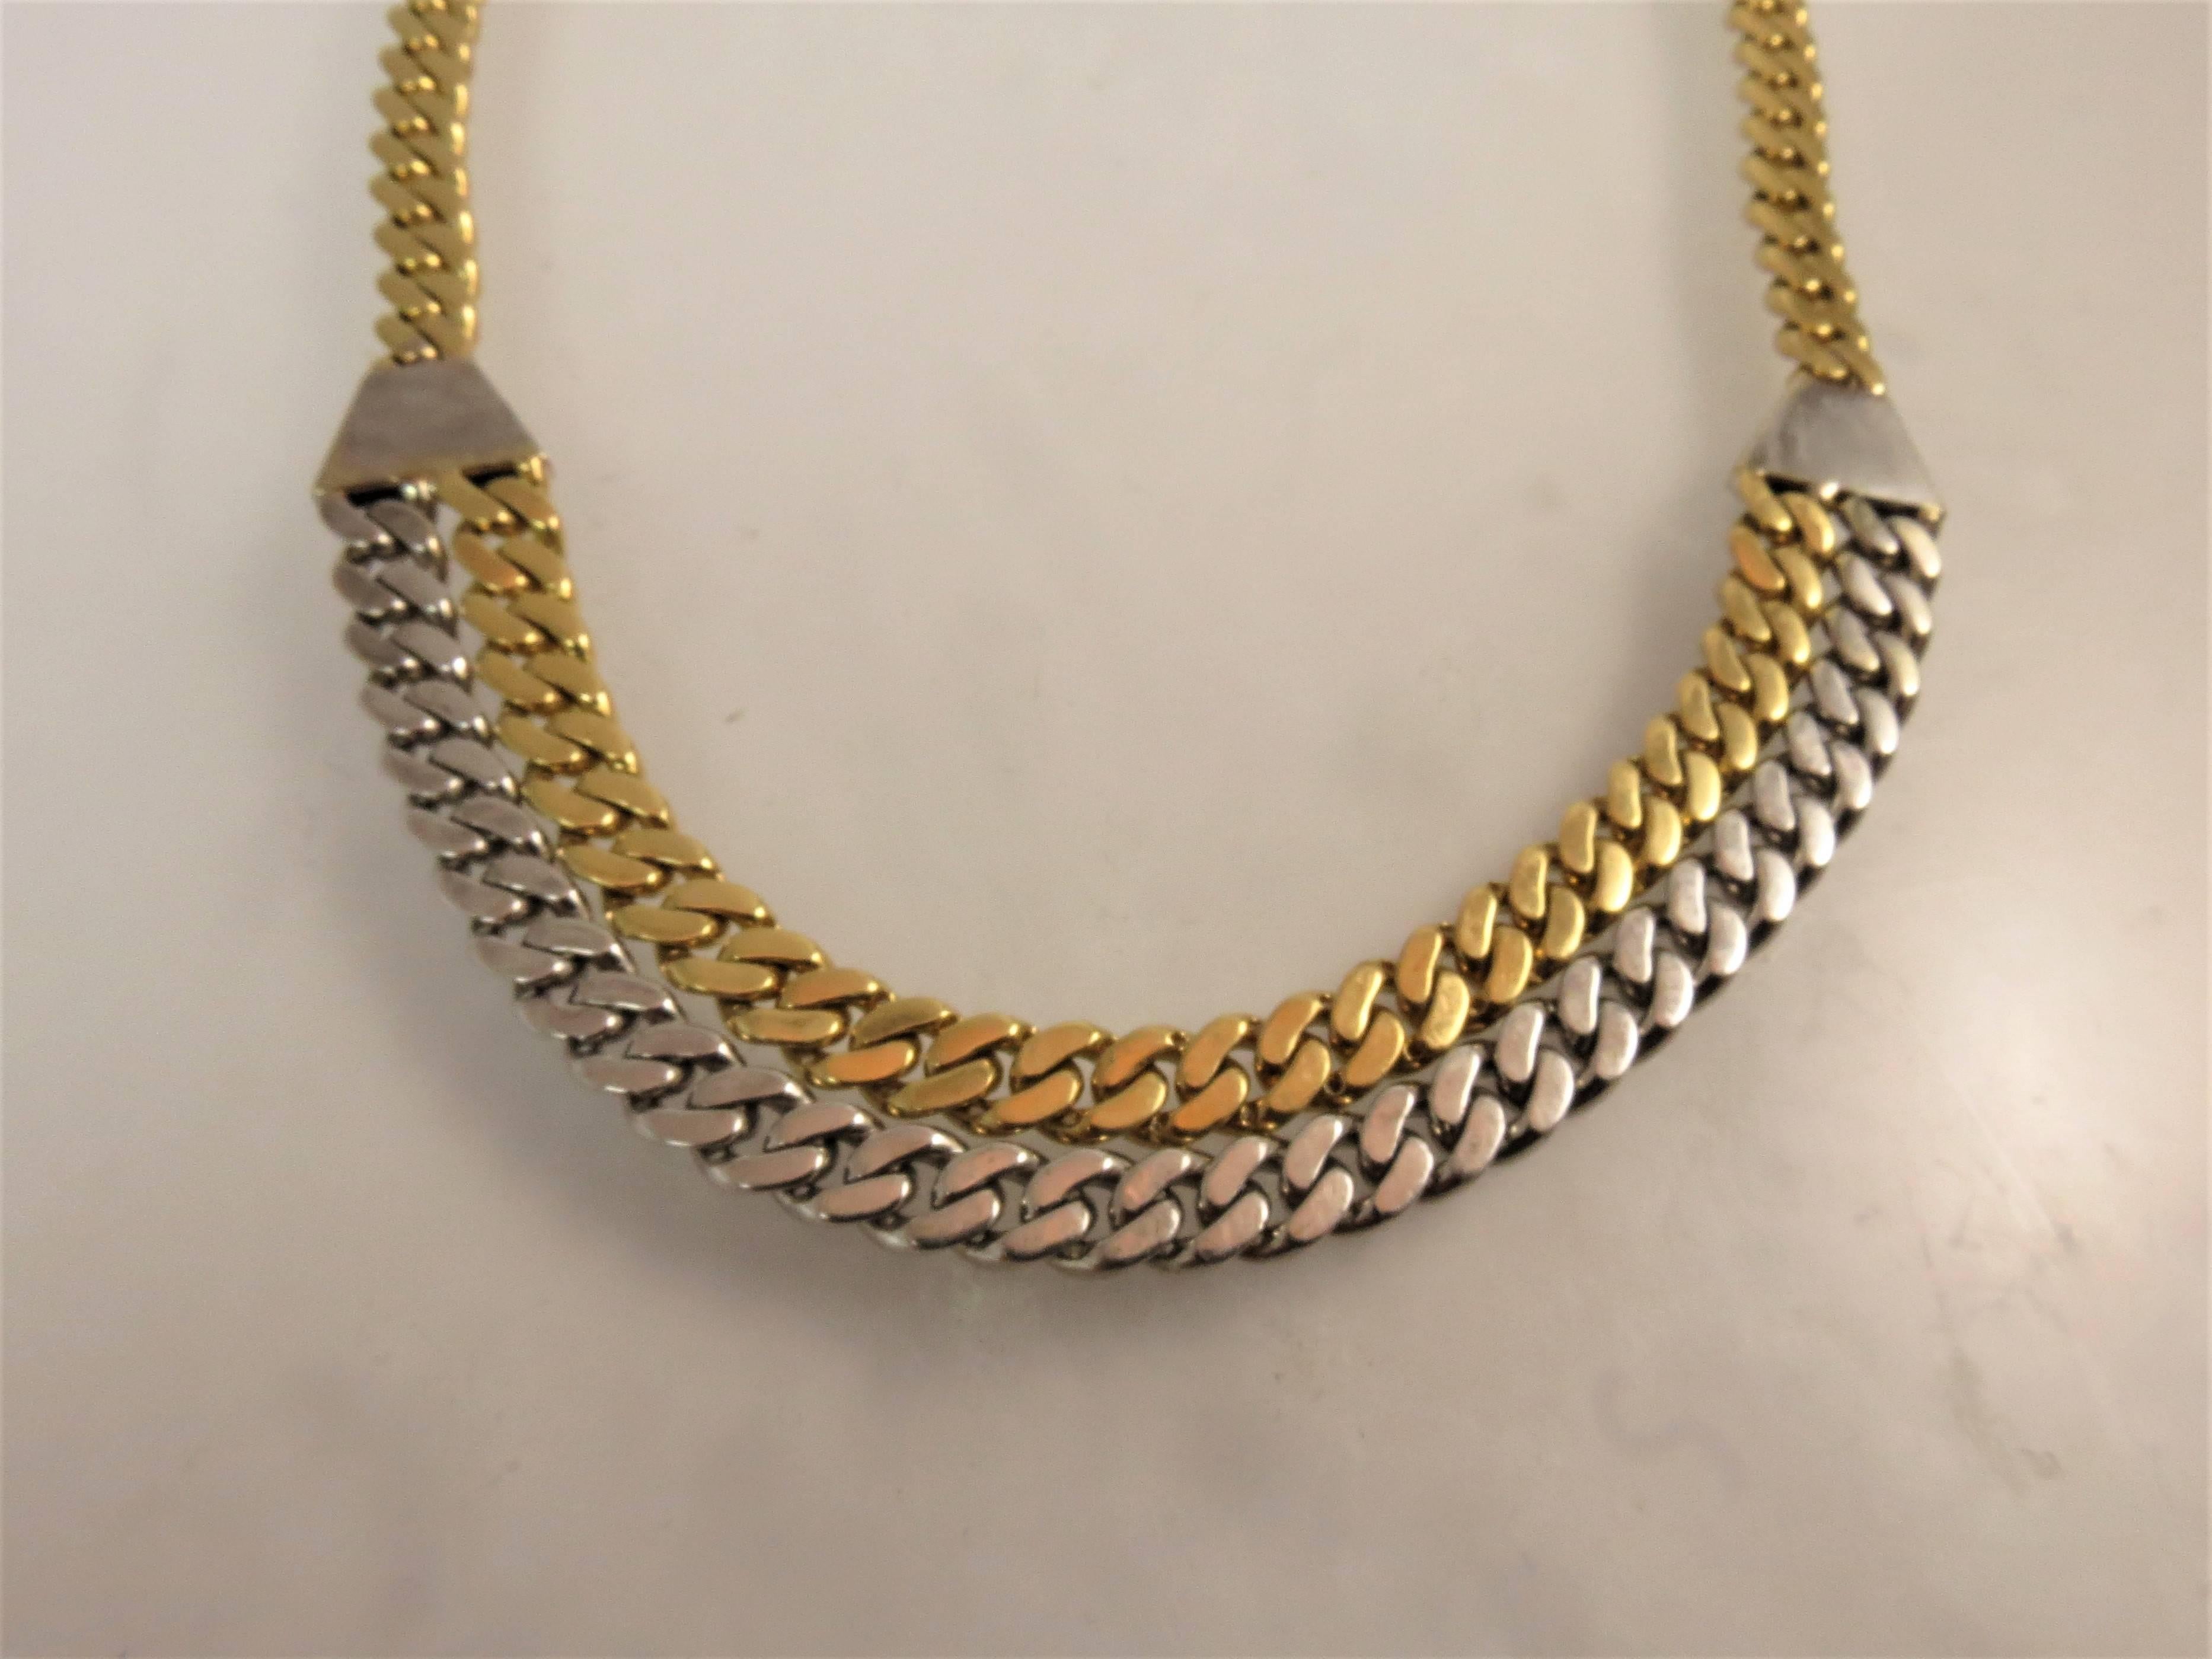 18K Yellow Gold and White Gold Diamond Curb Link Necklace, set with 264 full cut round diamonds weighing 3.25cts, F-G color, VS clarity, 16 inches long.